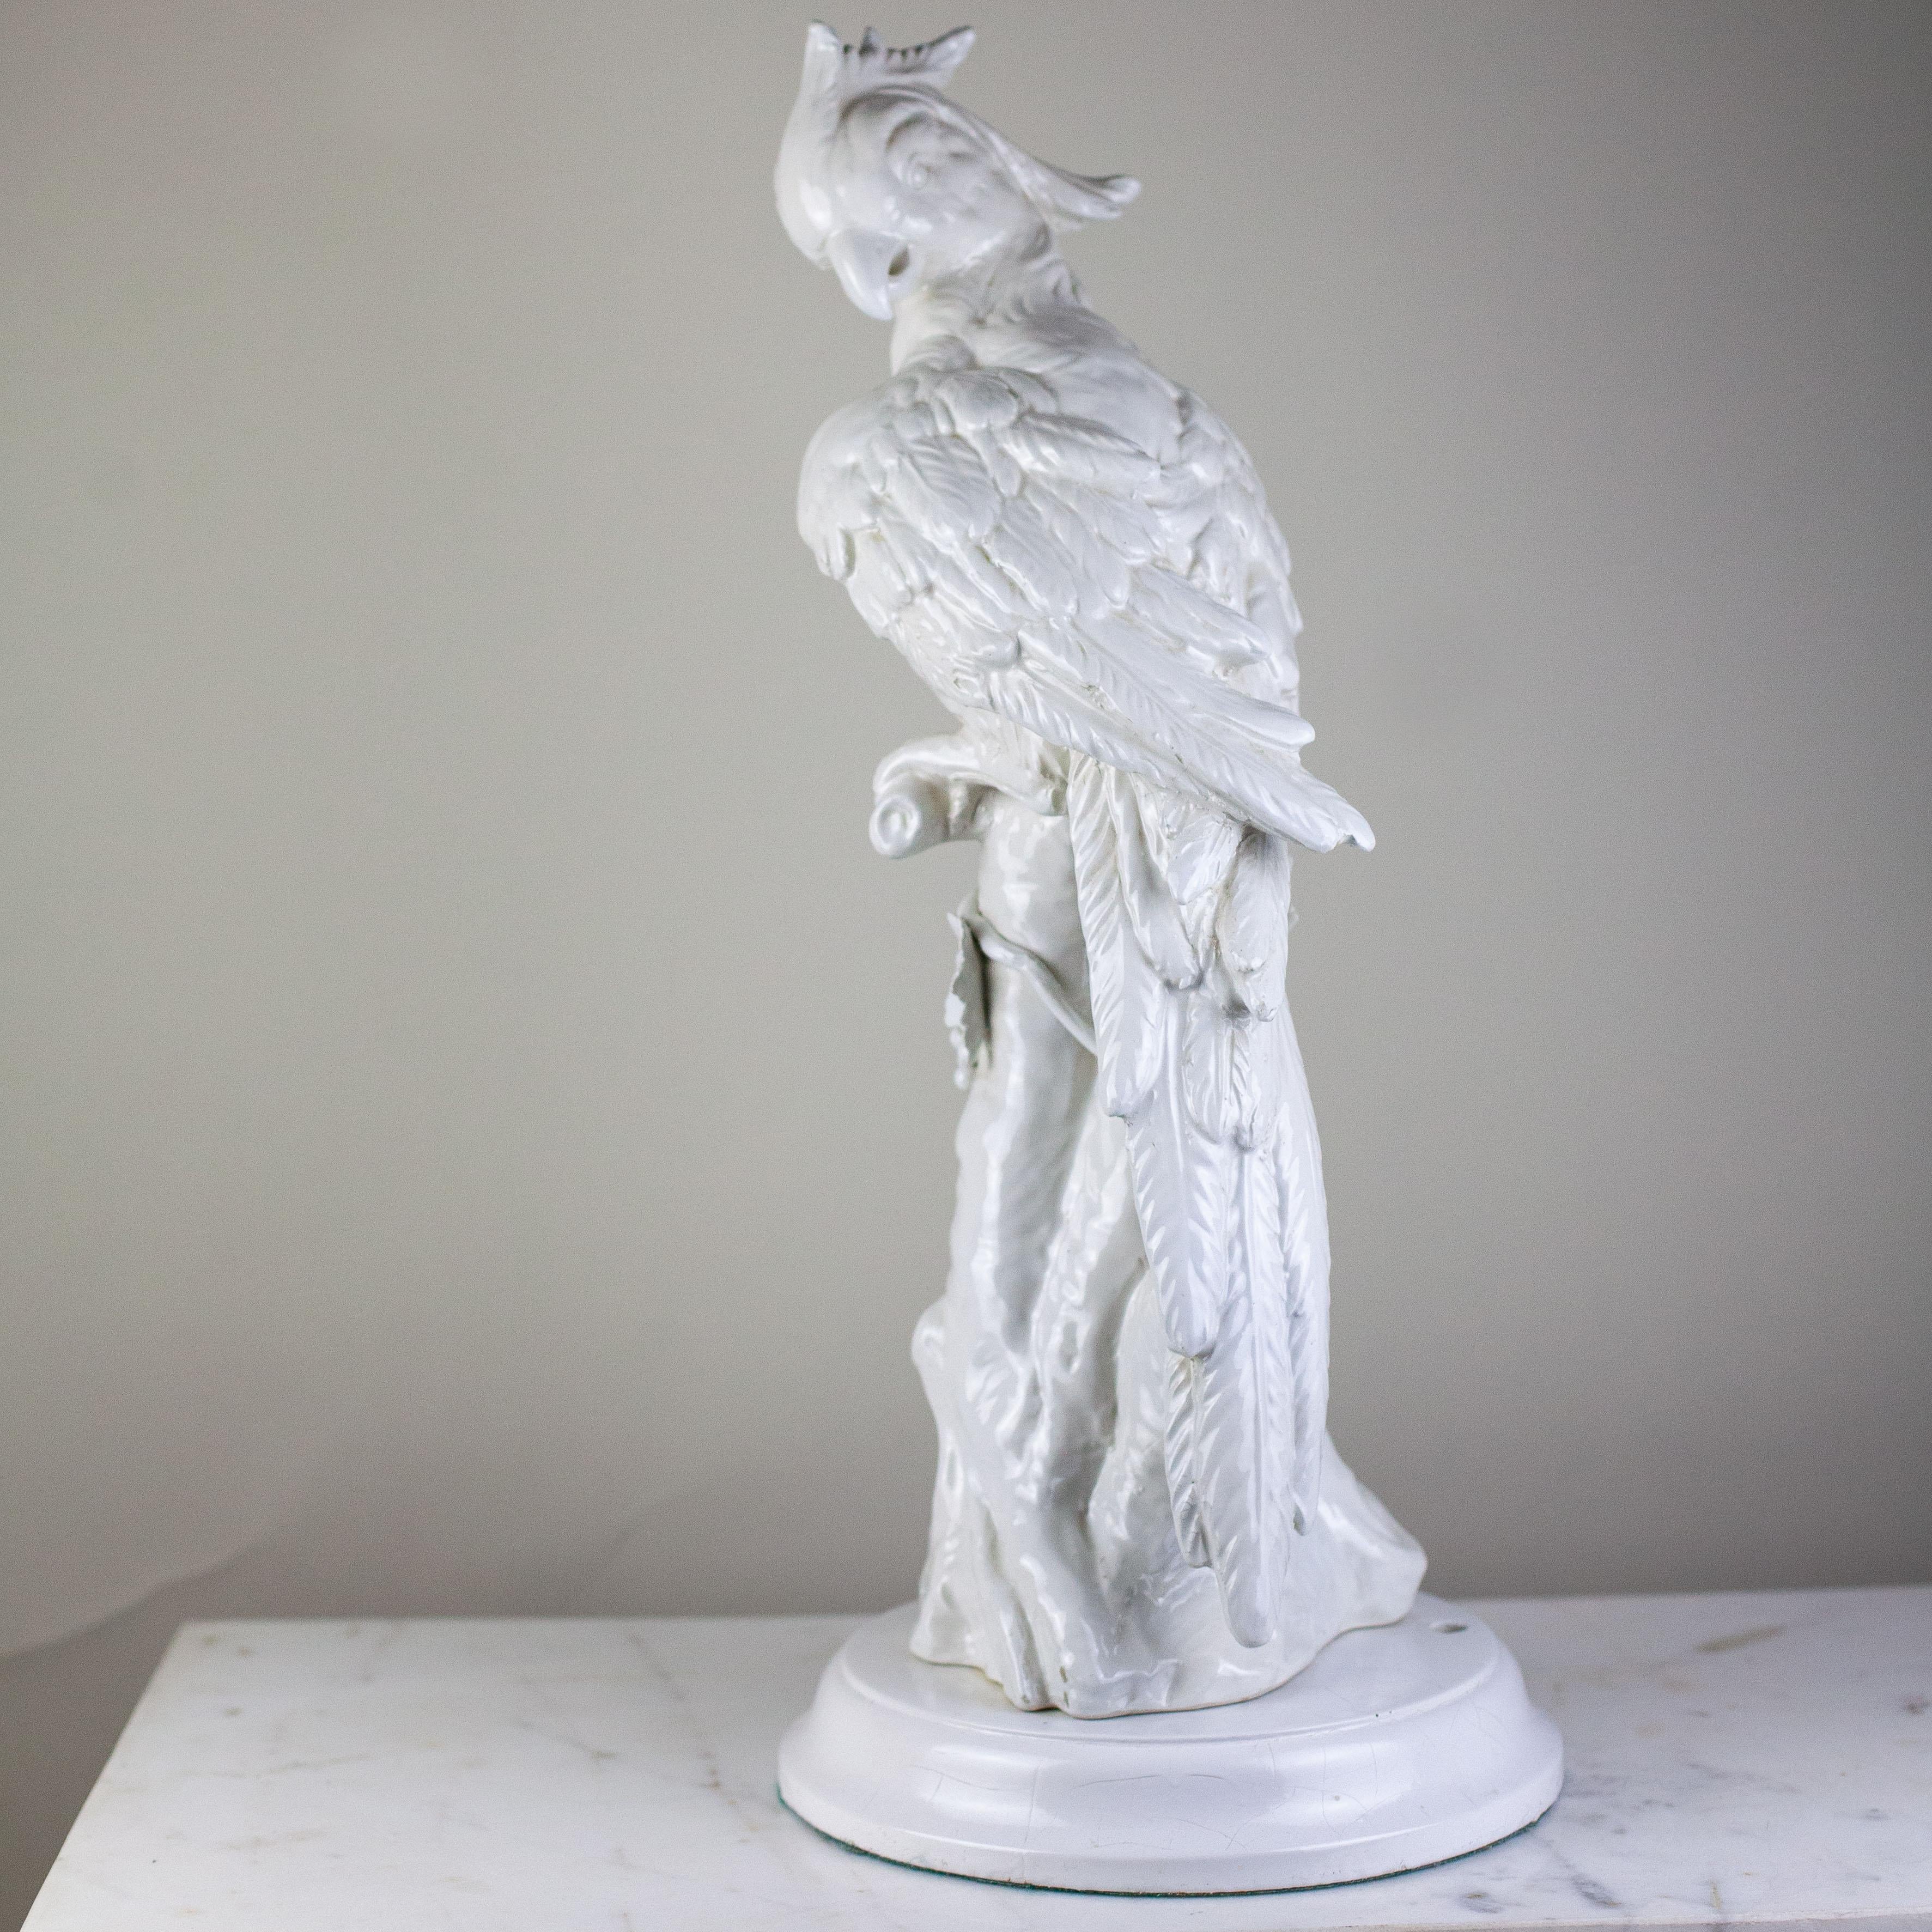 Fleurdetroit presents for your consideration, this fanciful sculpture depicting a cockatoo perched upon a tree trunk, in a classic white glaze. Originally a lamp base, this wonderous sculpture has impressive precence as a stand alone scultpture or